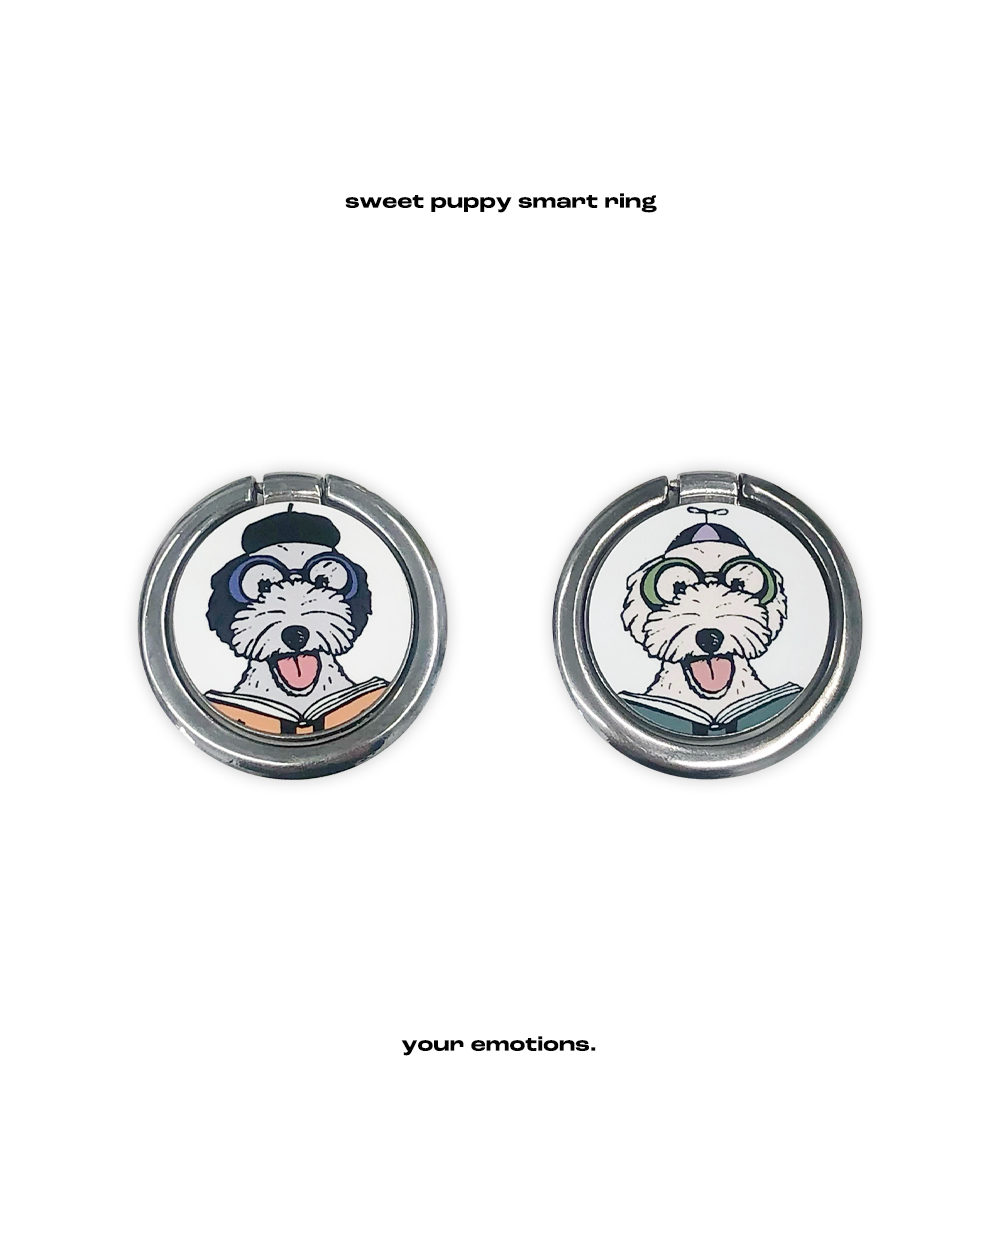 sweet puppy smart ring